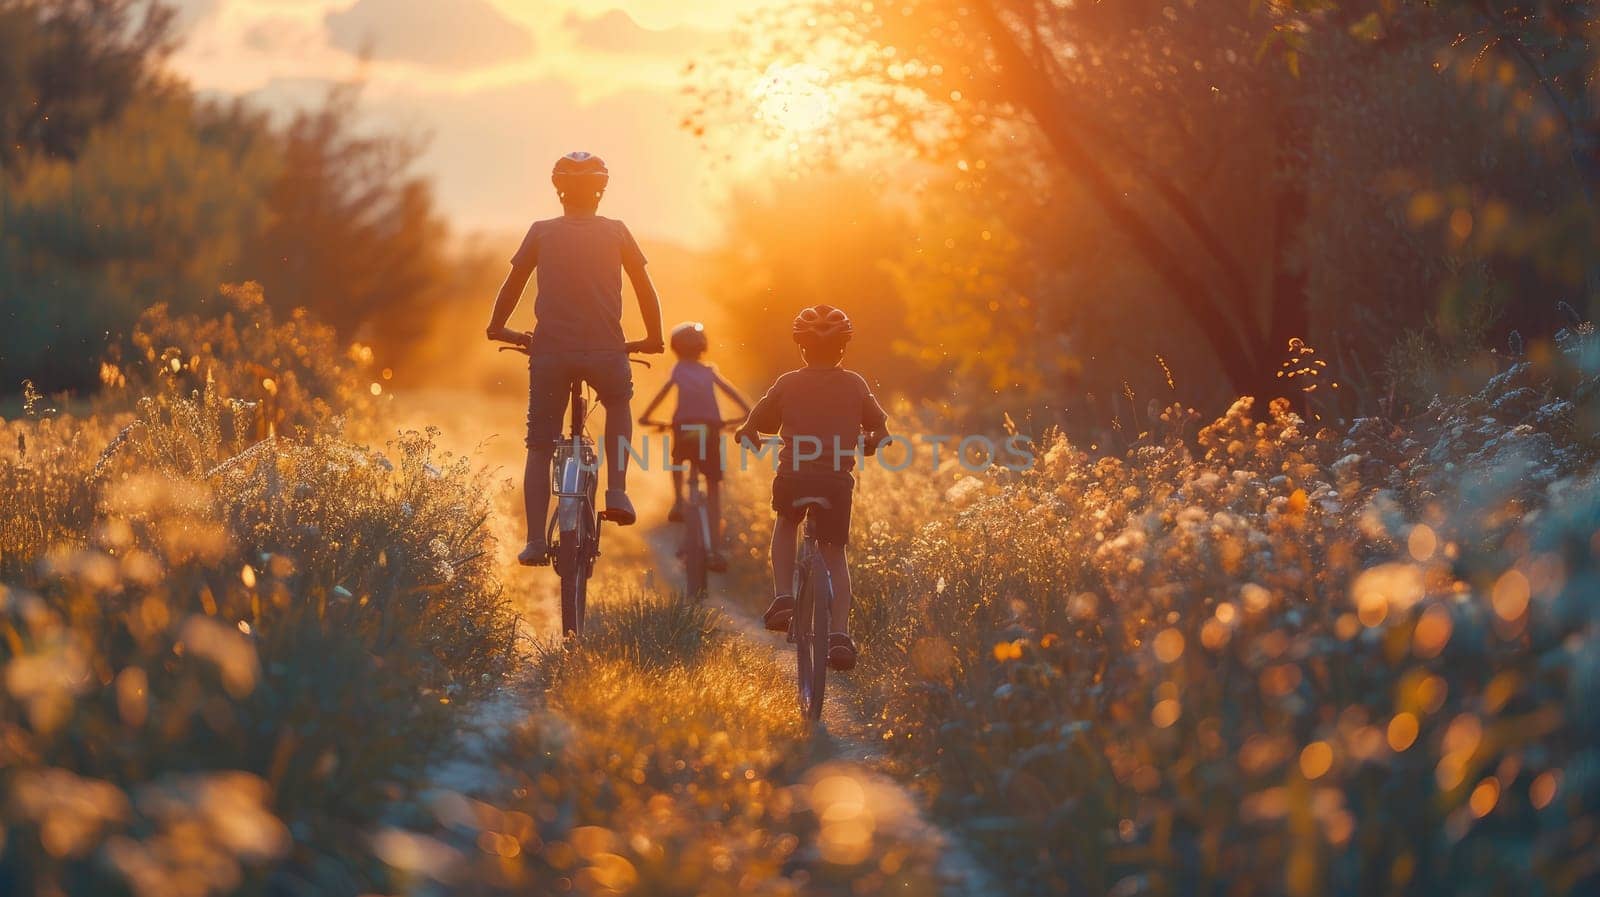 Happy Family Cycling Together at Sunset - Joyful Summer Activity Filled with Love and Togetherness..